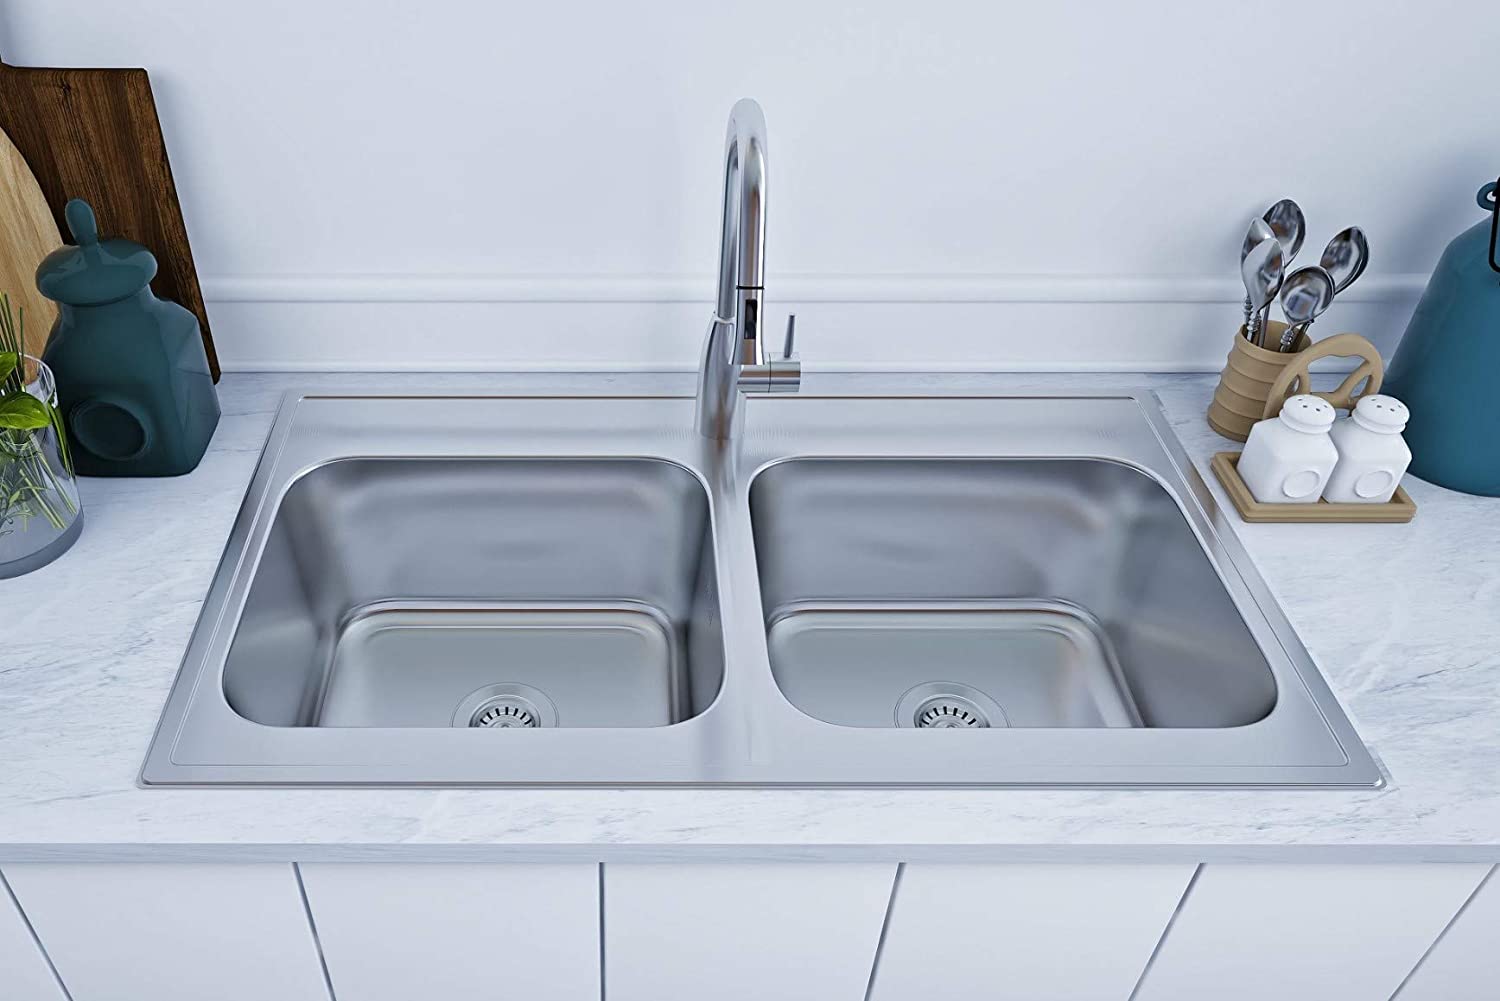 33x19 mobile home kitchen sink double bowl